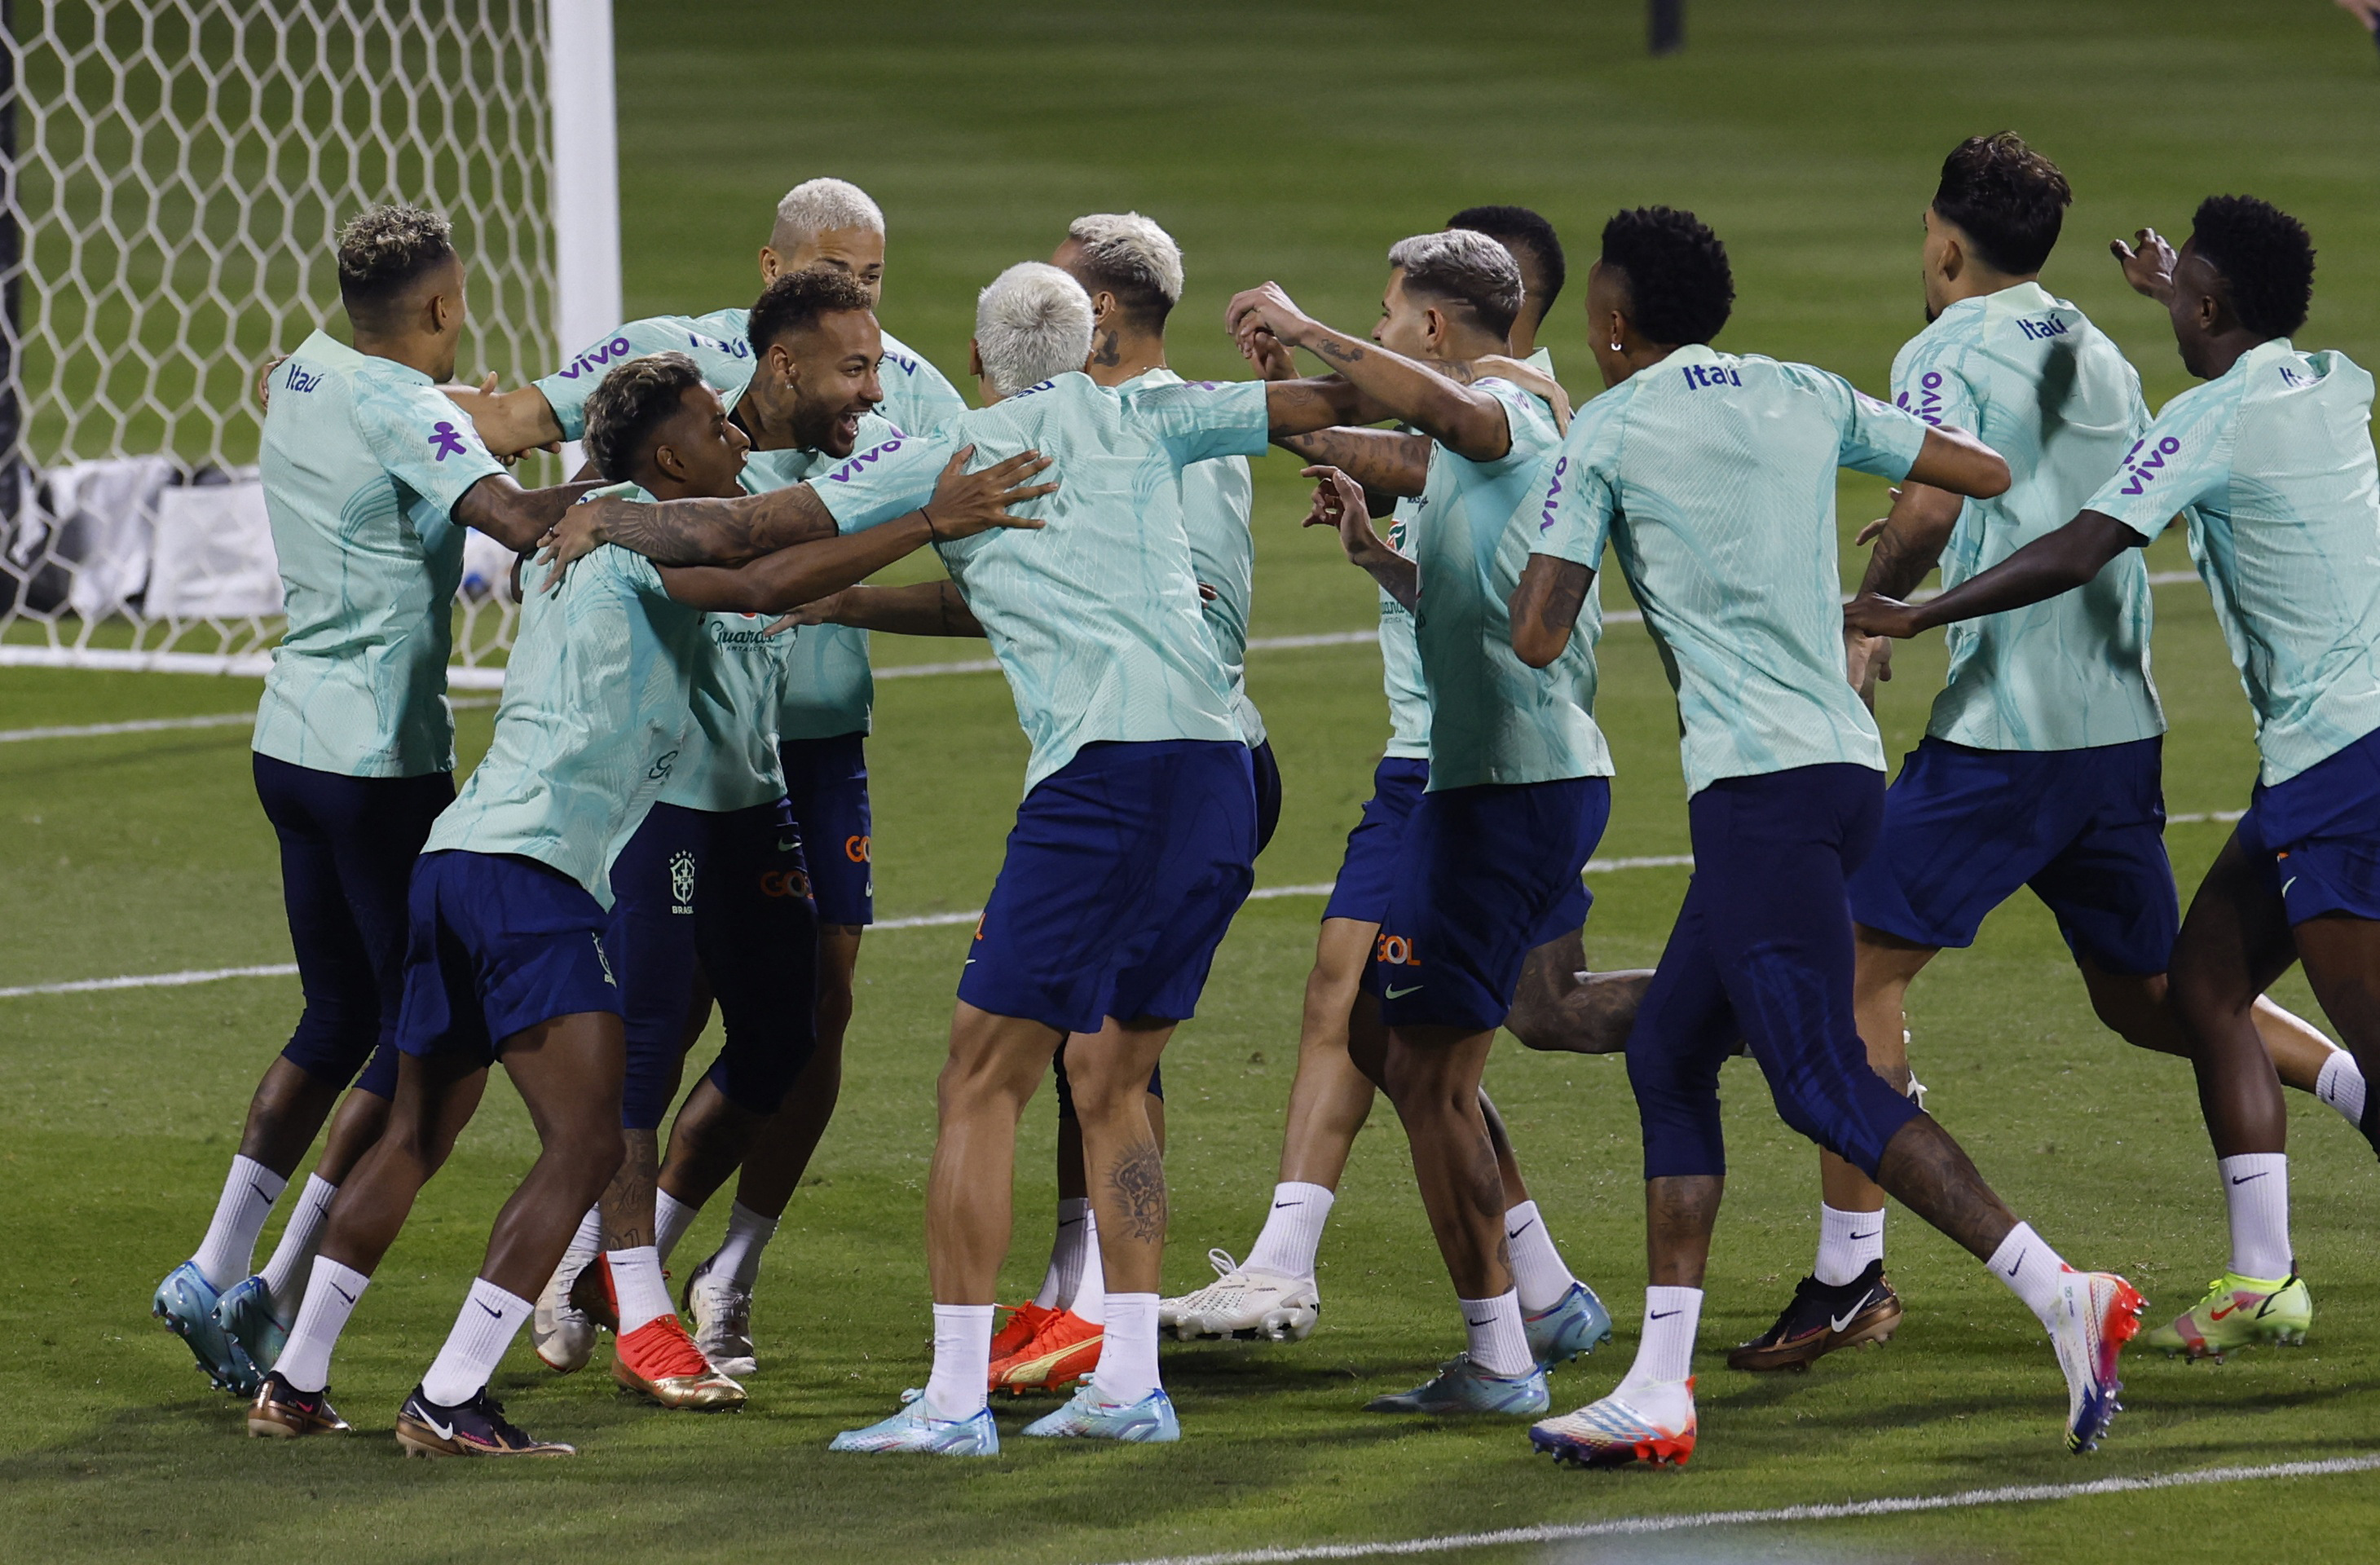 Brazil give no clues on team selection in first training session